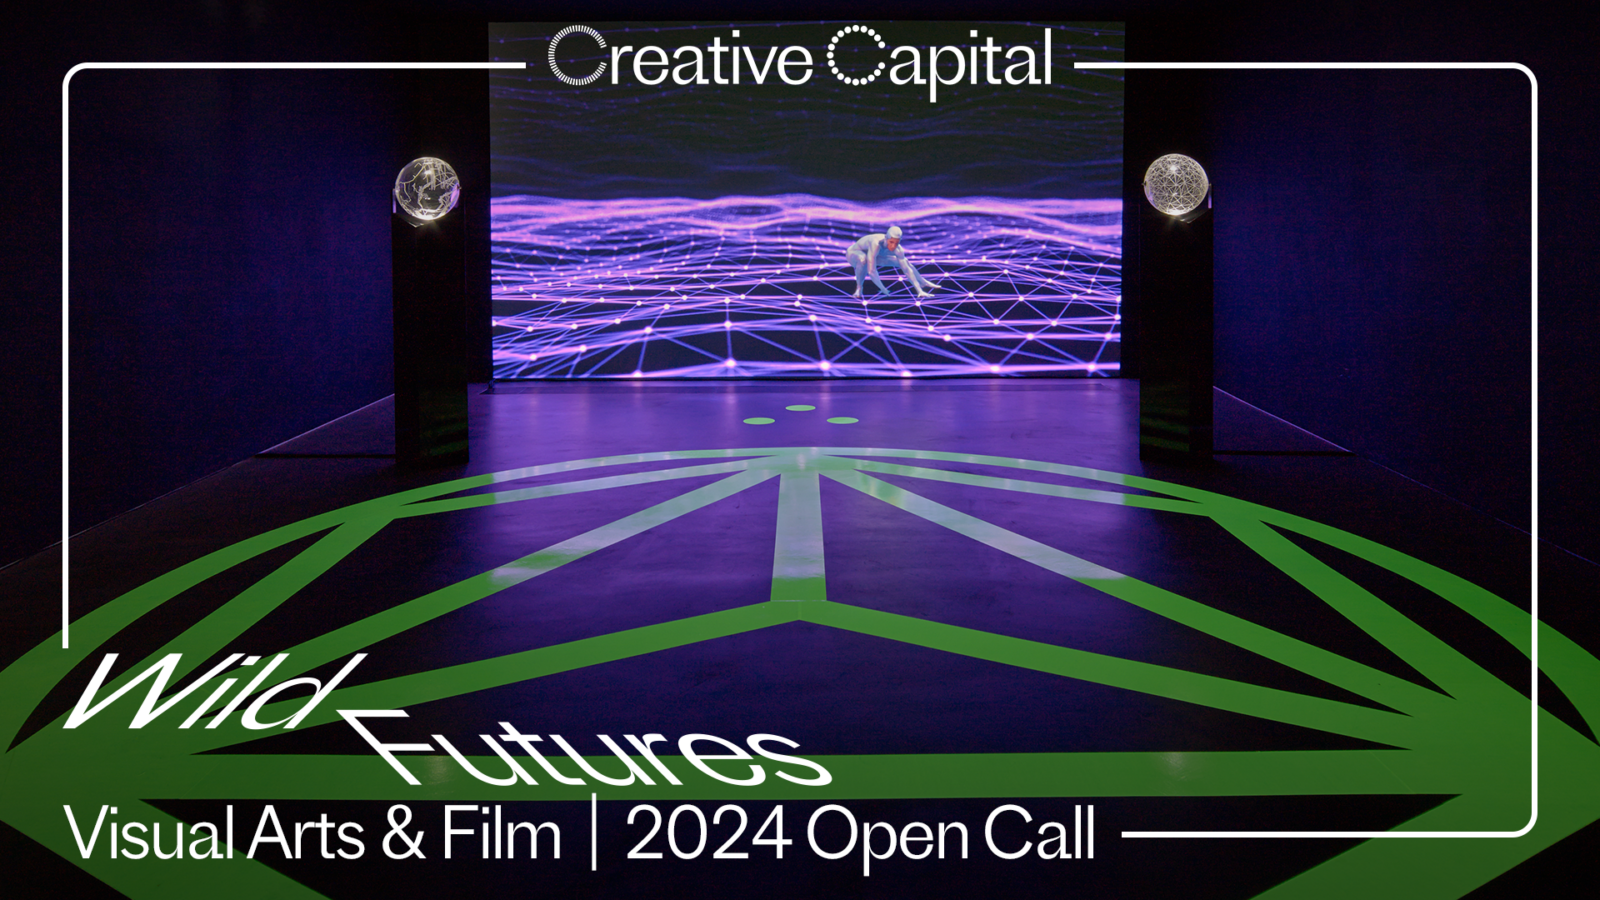 Open Call Art Visuals & Poetry film competitions 2021